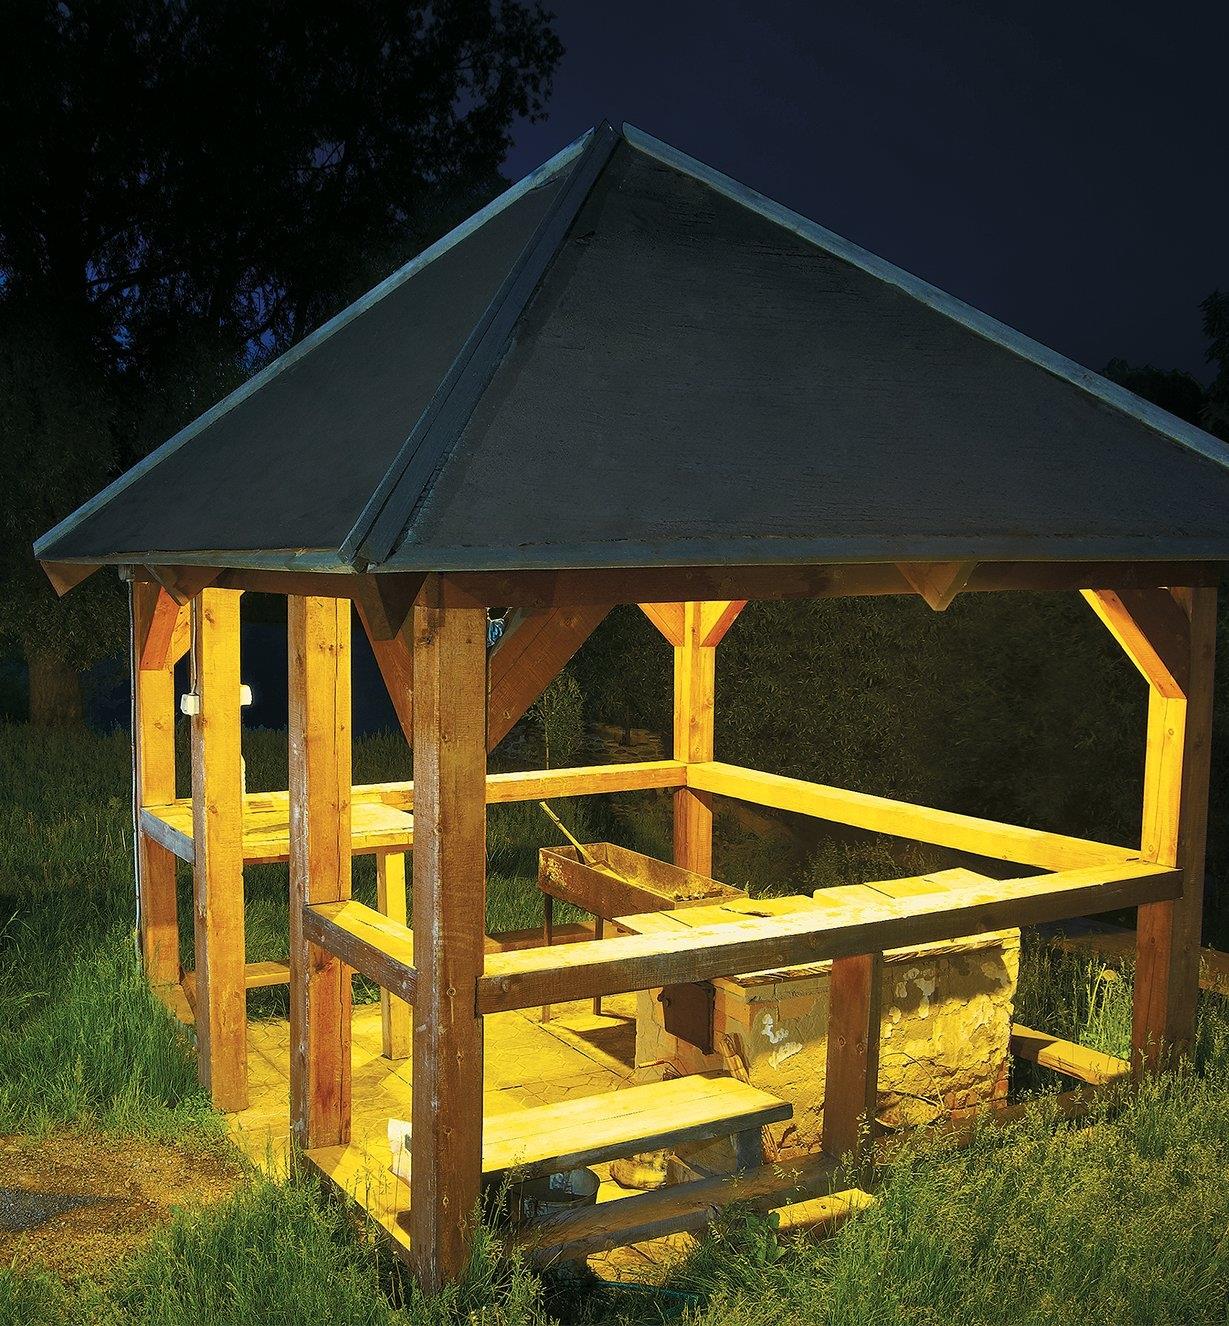 Example of white LED lights installed in a gazebo